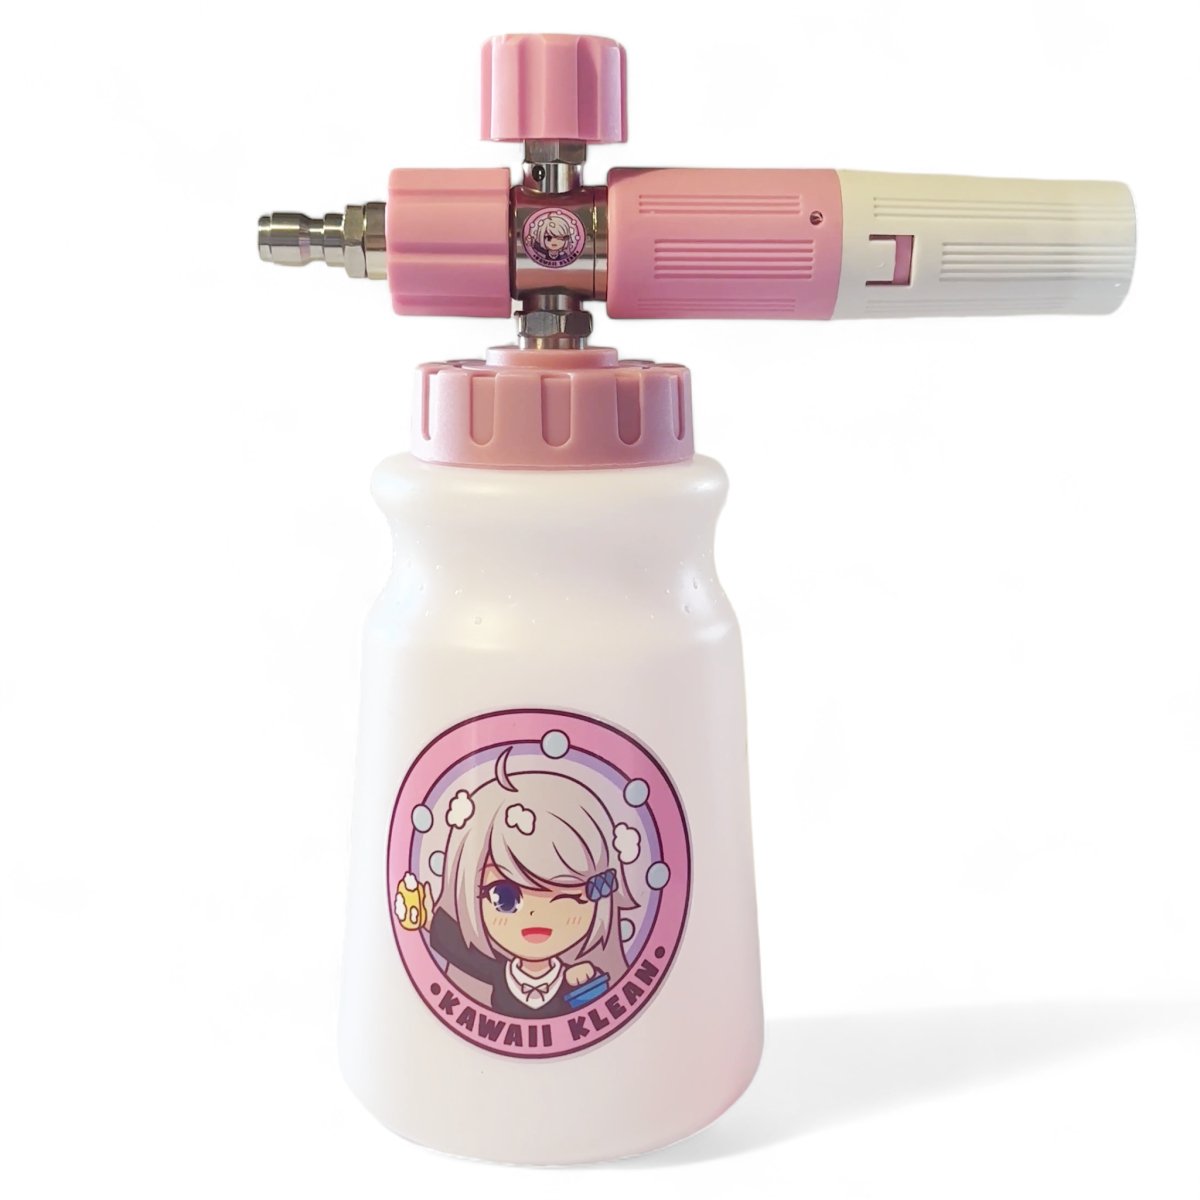 Pink foam cannon with a logo on the bottle, centered against a simple background